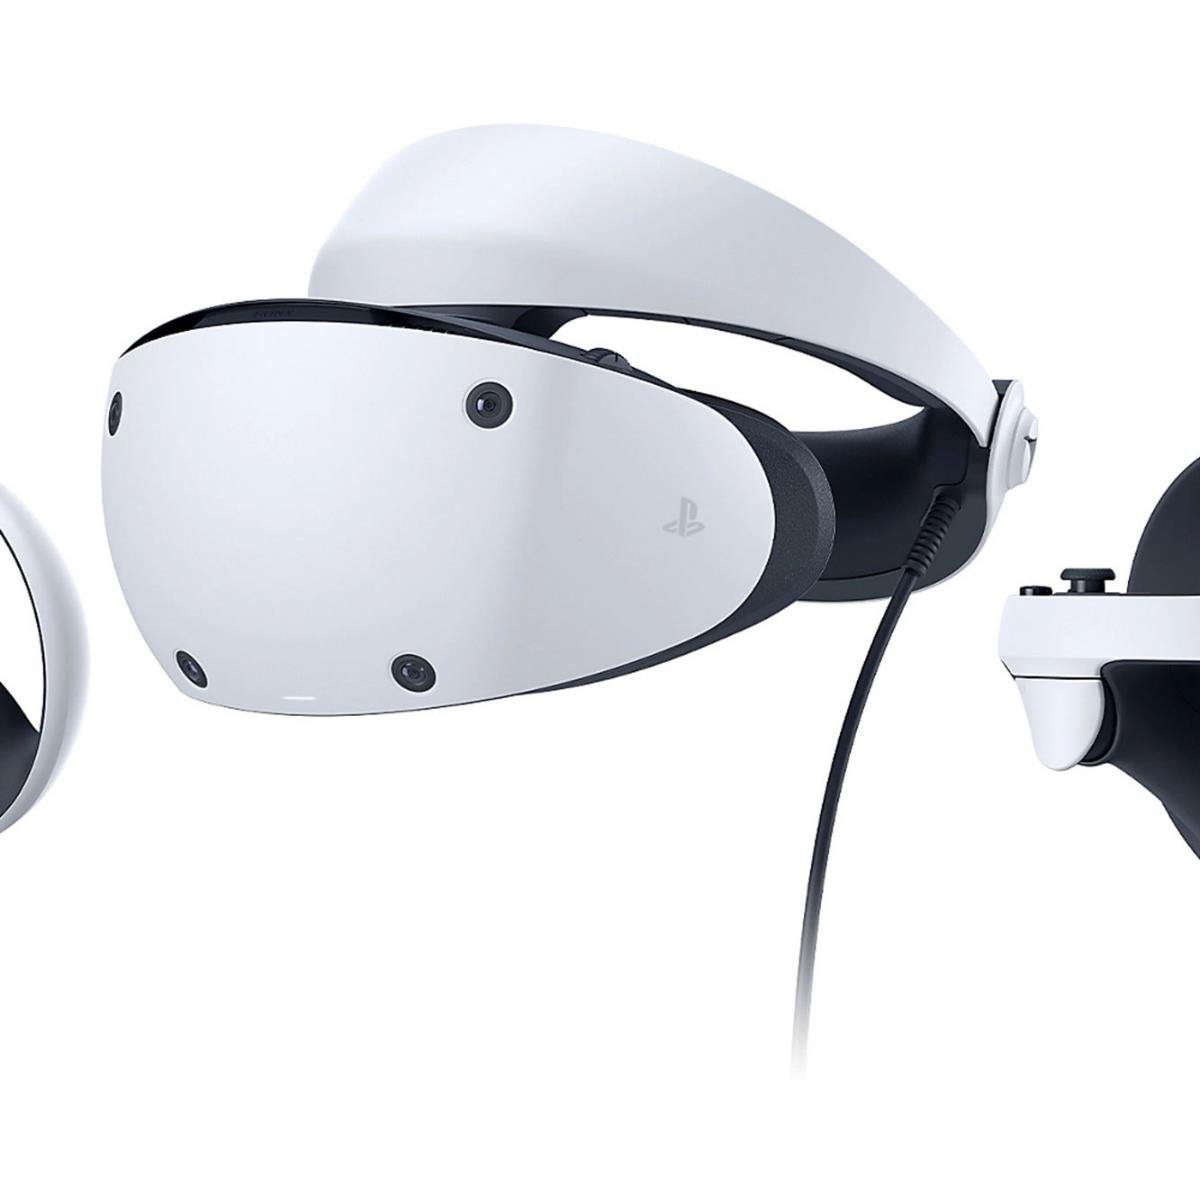 Sony Aims To Ship 2M PSVR2 Headsets In Battle With Quest 2 For VR